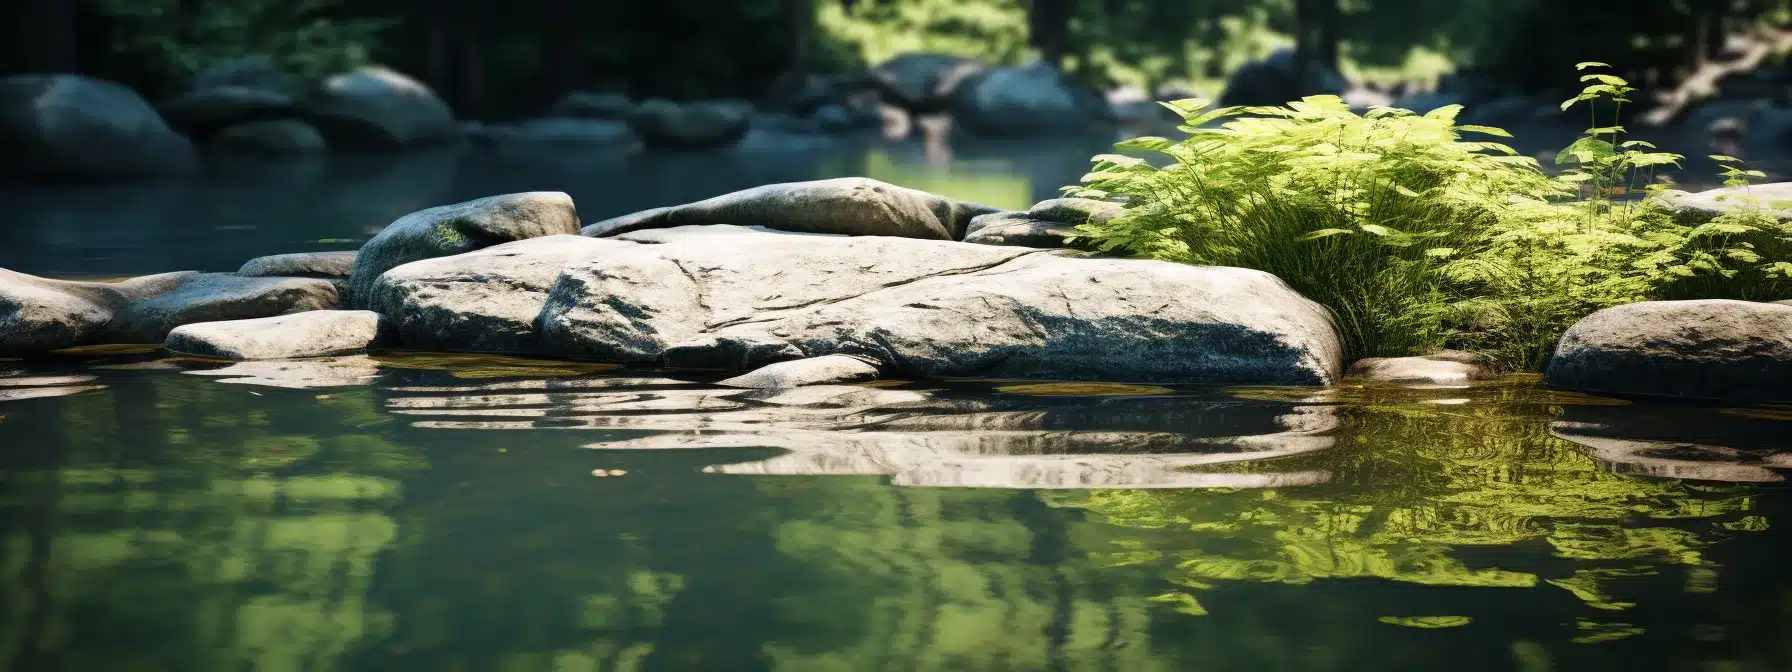 A Serene Pond With A Polished Stone Creating Smooth Ripples.